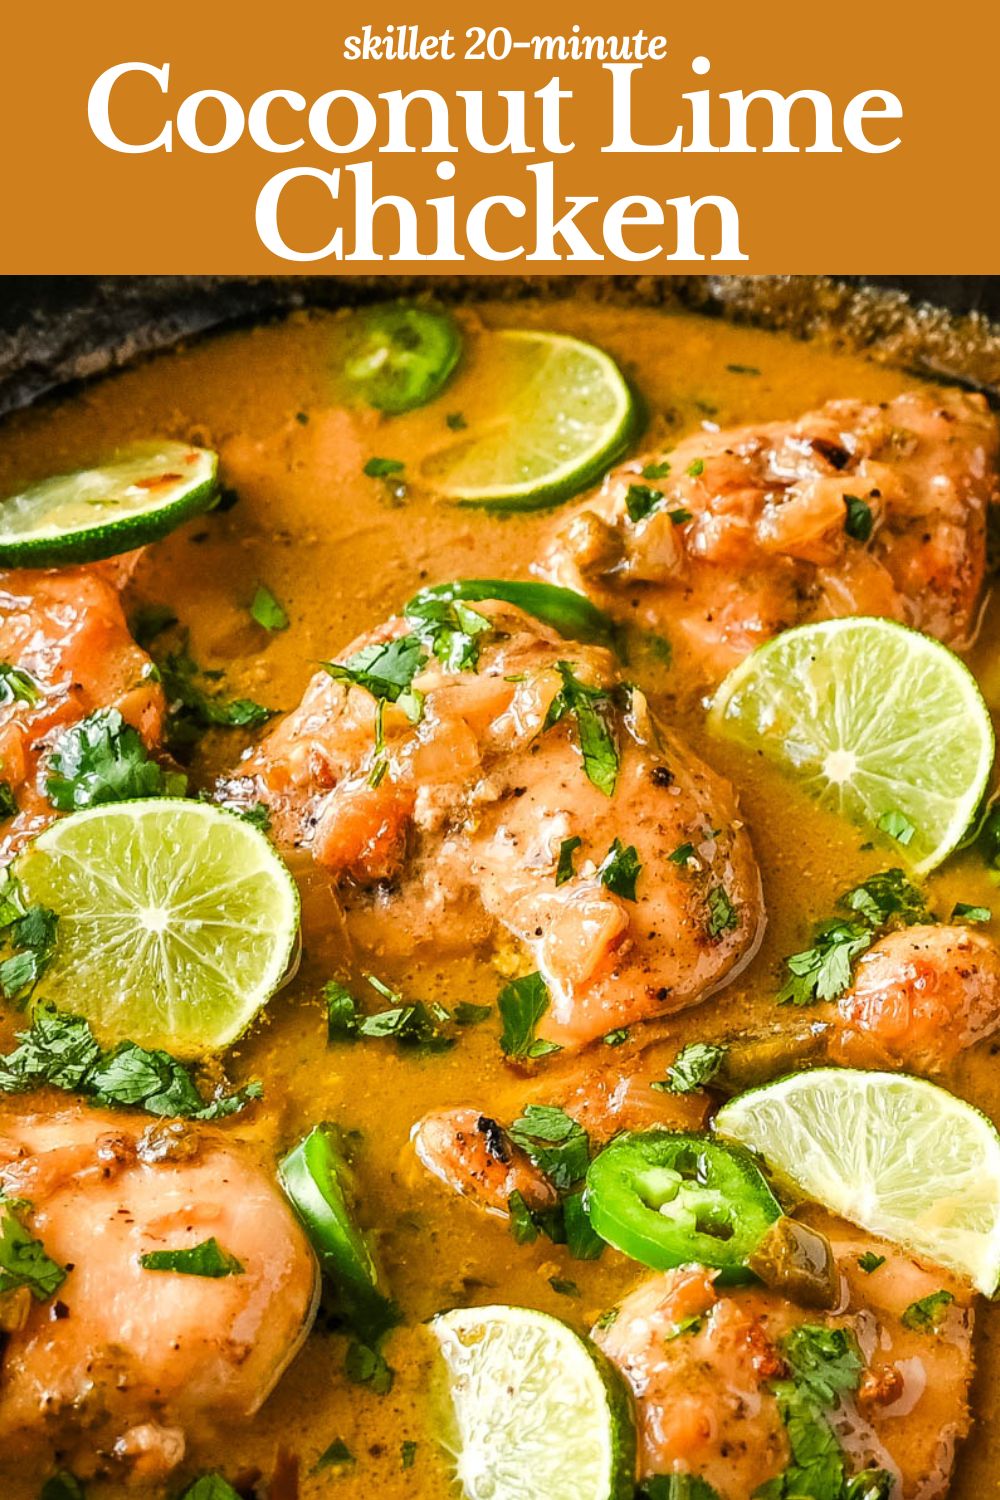 This Skillet Coconut Lime Chicken is made with a homemade coconut lime sauce crafted from creamy canned coconut milk, zesty fresh lime juice, and a touch of garlic and ginger and has the perfect sweet, savory, and tangy flavors. It is paired with tender, juicy chicken breasts for a quick, easy, and flavorful one-skillet dinner.